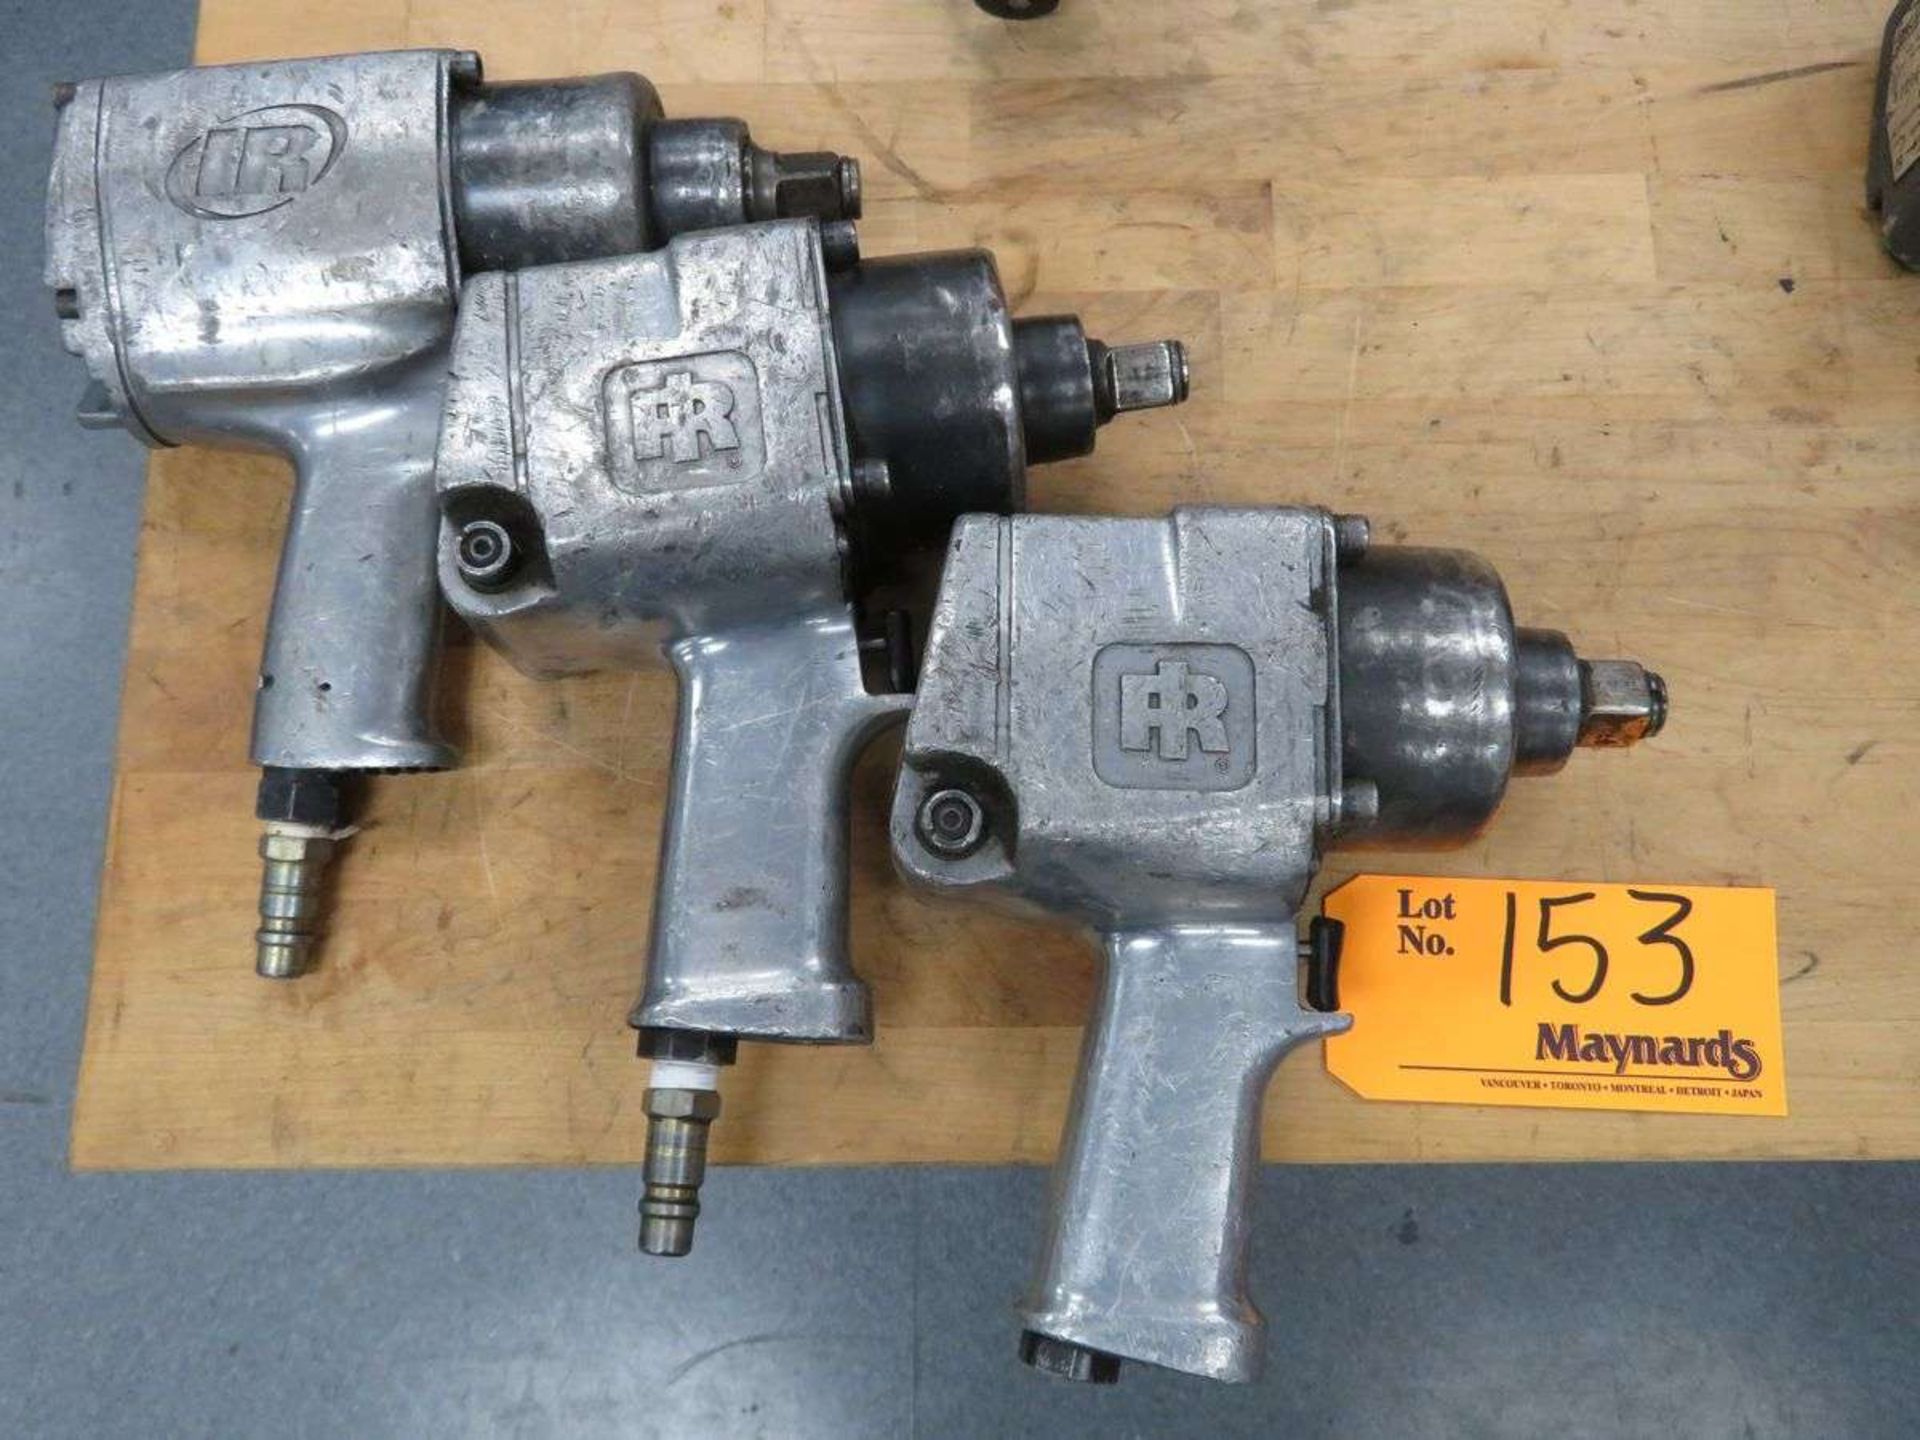 Ingersoll-Rand (3) 3/4" Drive Pneumatic Impact Wrenches